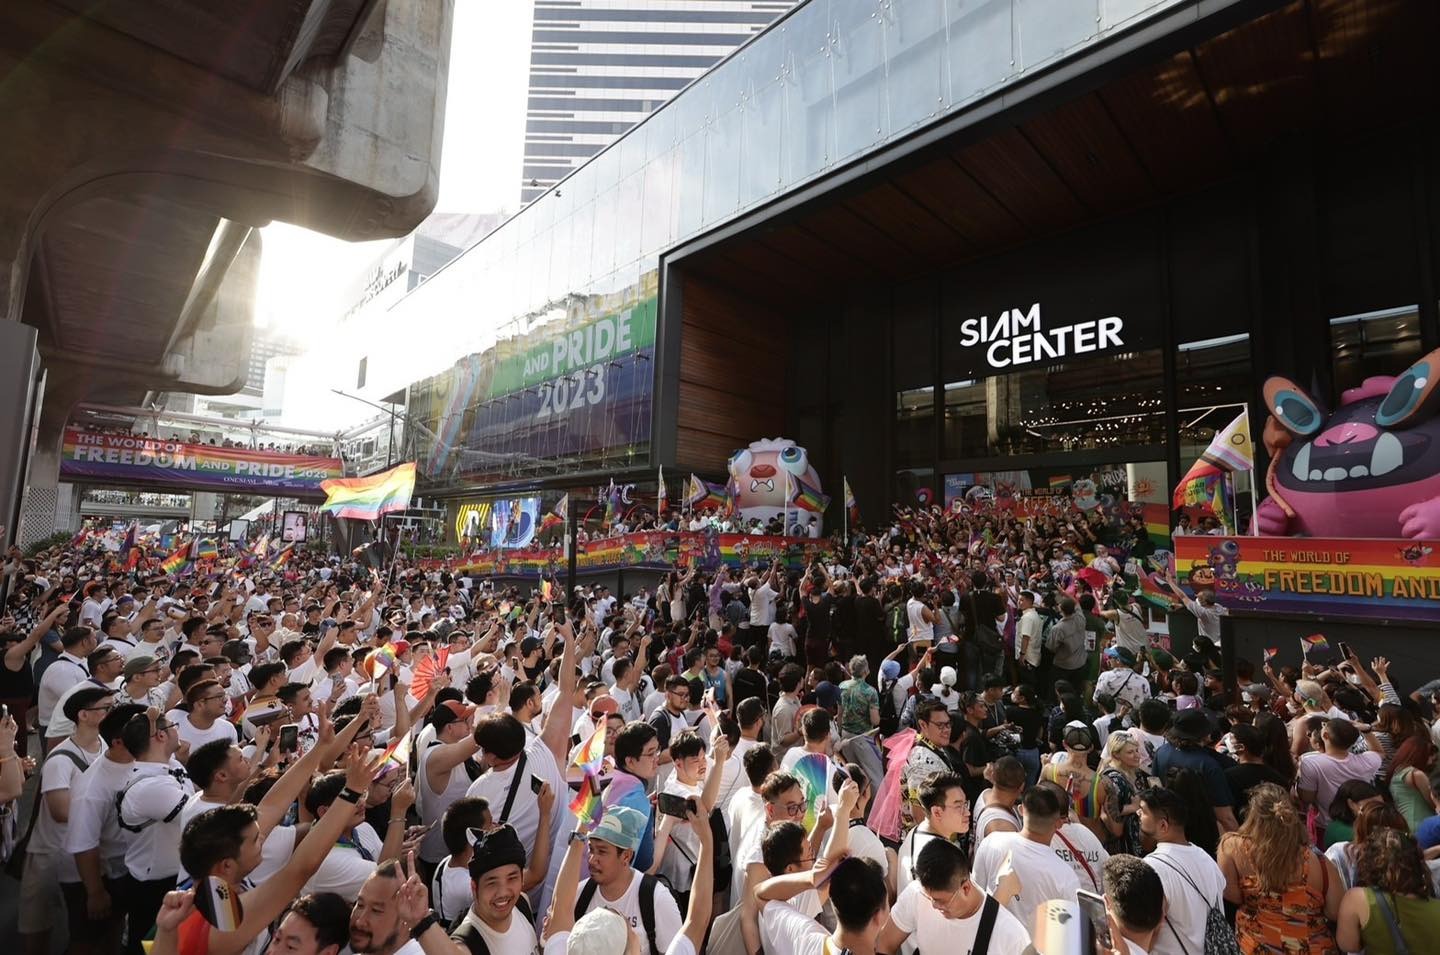 A crowd of people taking part in the Pride Parade 2023 that passed through Siam Center 